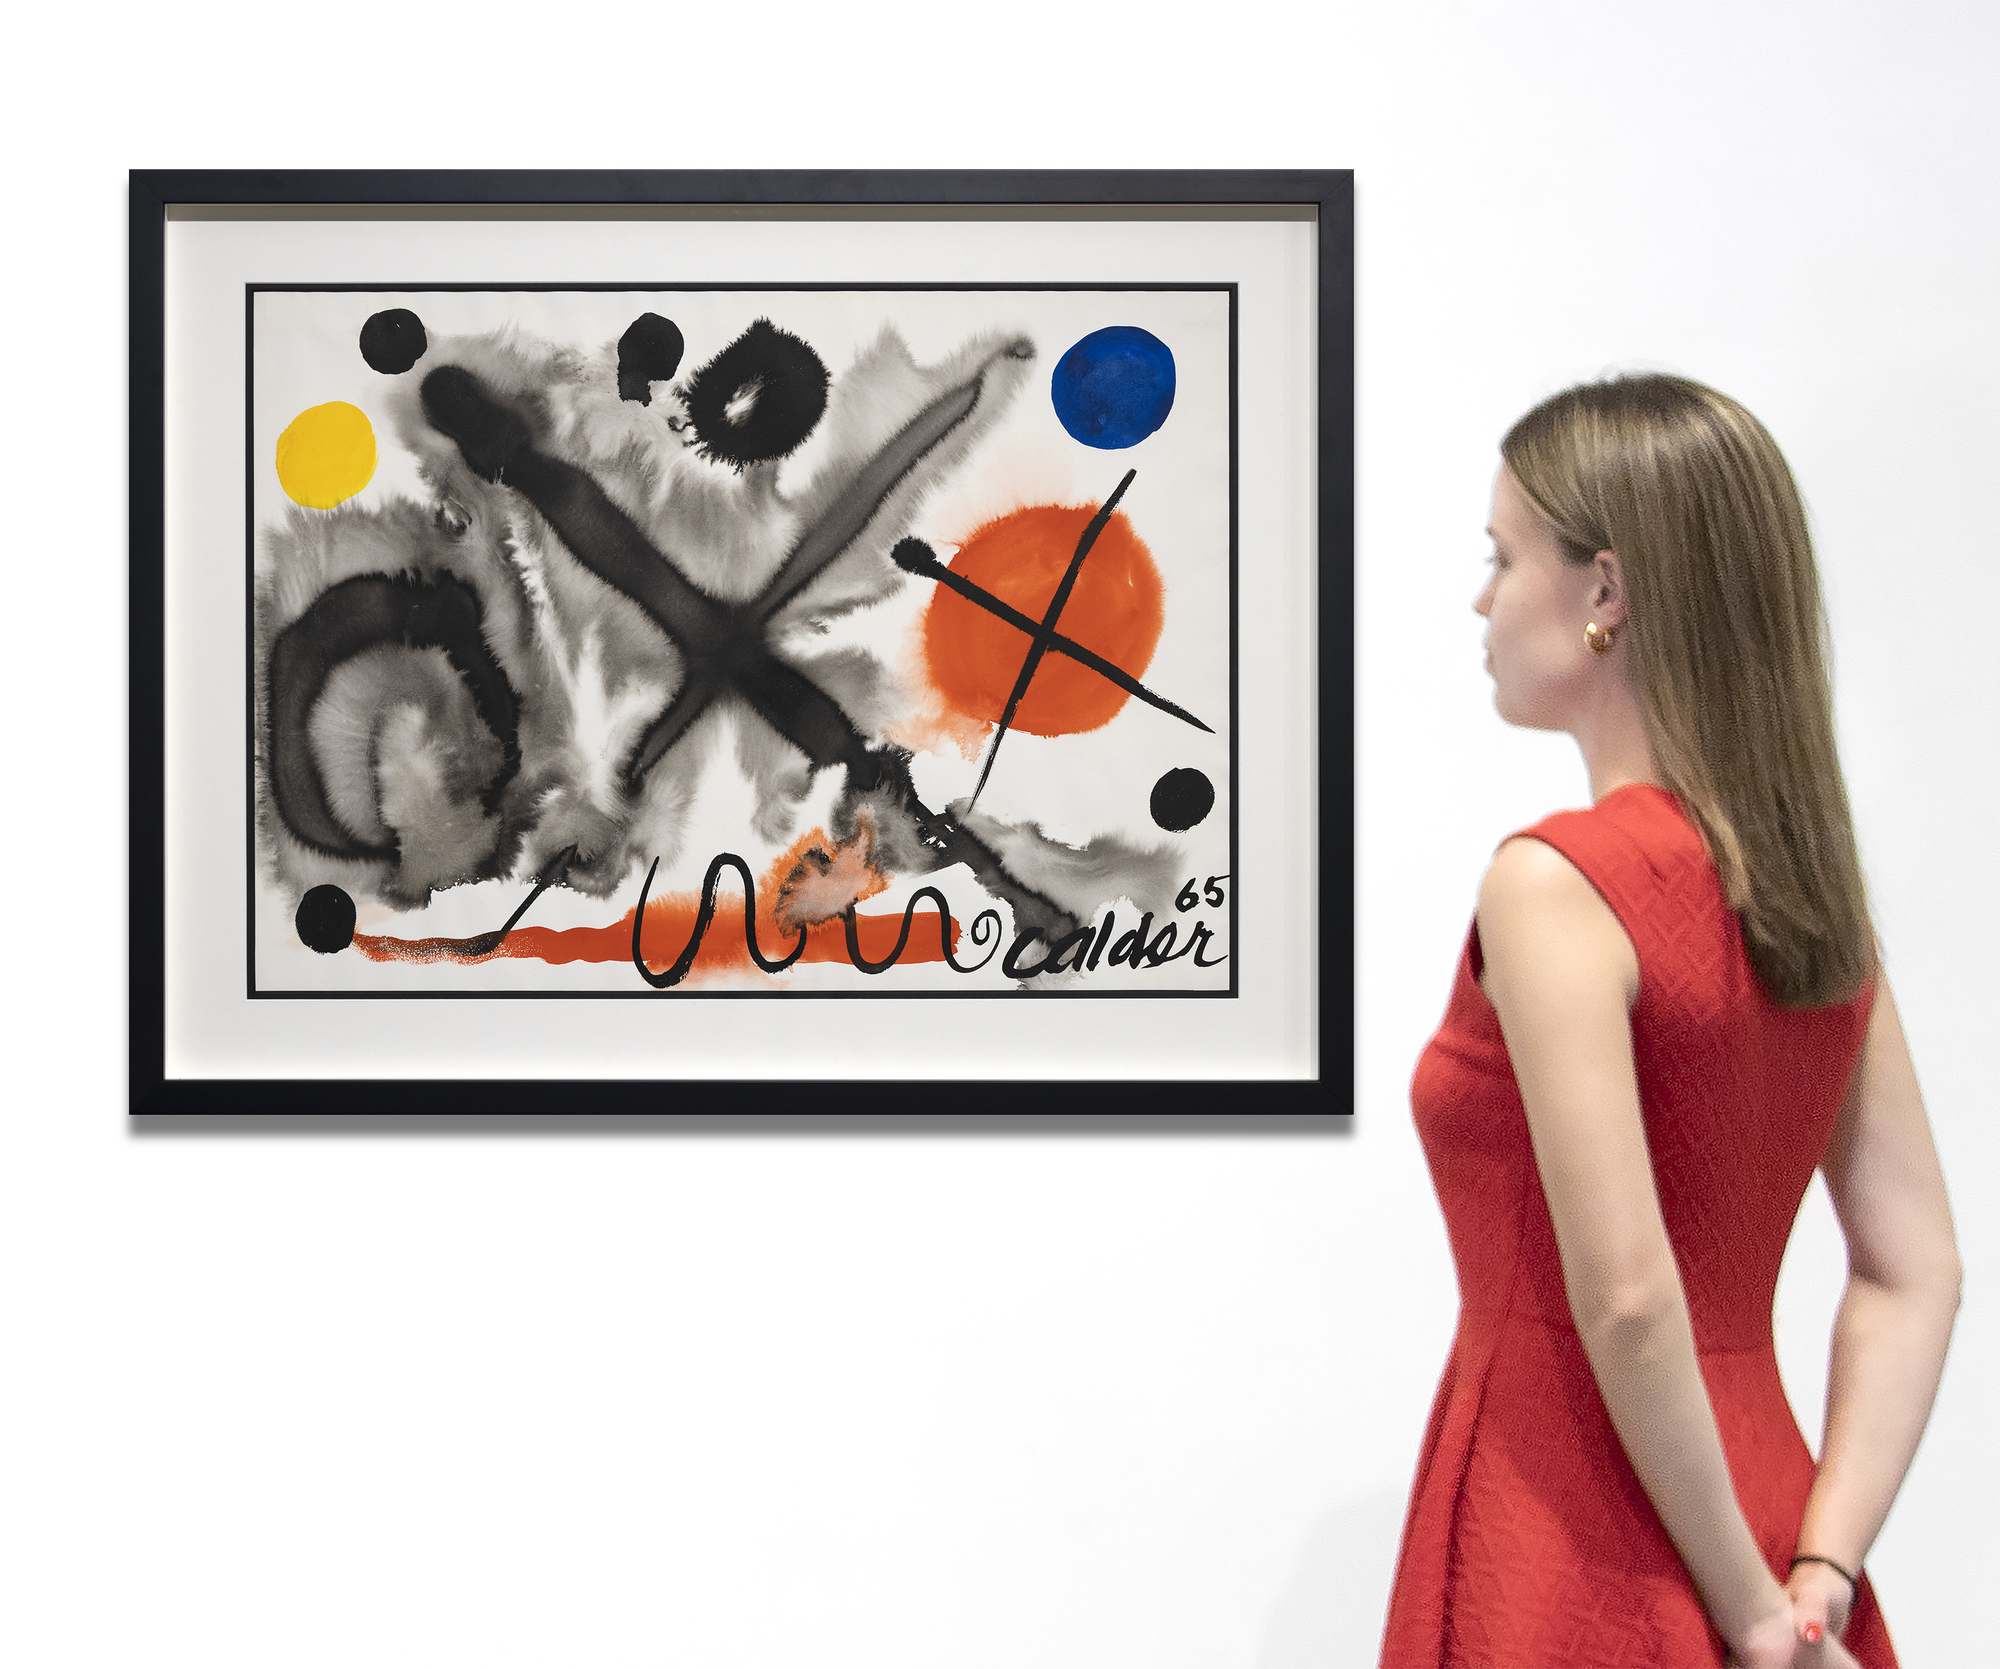 © 2023 Calder Foundation, New York / Artists Rights Society (ARS), New York
<br>Two Crosses by Alexander Calder is a striking work on paper, blending transparent watercolor and gouache, showcasing his signature repertoire of shapes and symbols. At its heart lies a large, black 'X' on a fluid, grayish wash, and nearby, a smaller, opaque black cross overlapping a semi-opaque red ball, and to its left, a roundish transparent wash patch hosts a black crescent shape. Several spheres in black provide accompaniment, and the artist's favored primary colors, and at the lower margin, his charming undulating line. Calder's sparing use of watercolor allows the paper's white to showcase the forms and symbols, creating a dynamic, impactful artwork where simplicity and the interplay of transparent and opaque elements captivate the viewer.